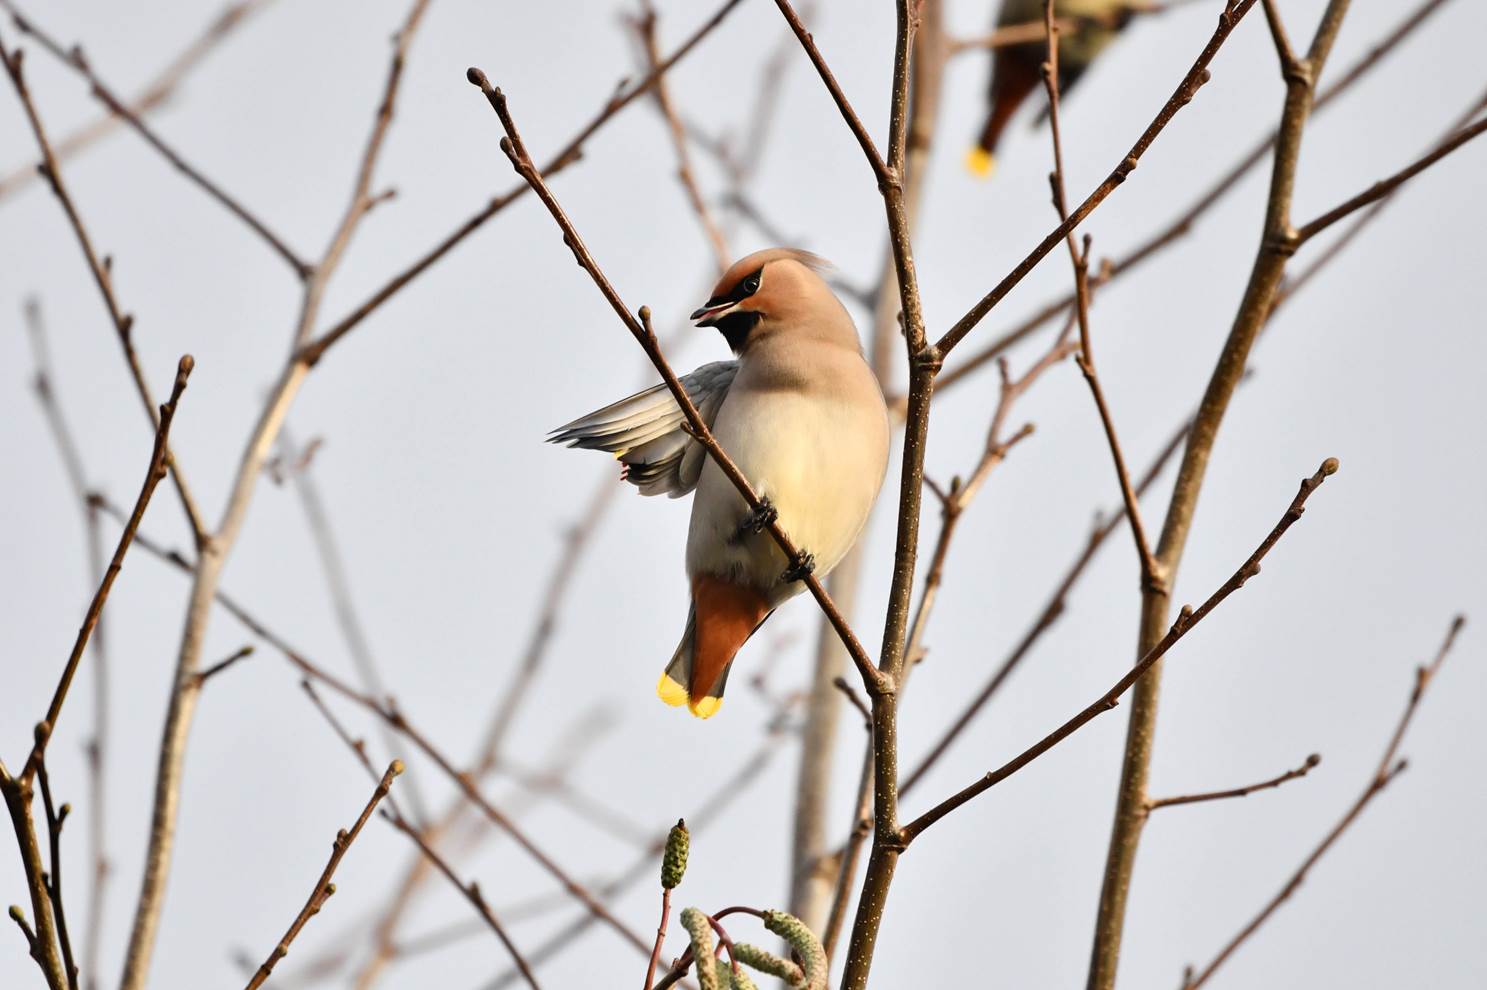 A bird sitting on a tree branch

Description automatically generated